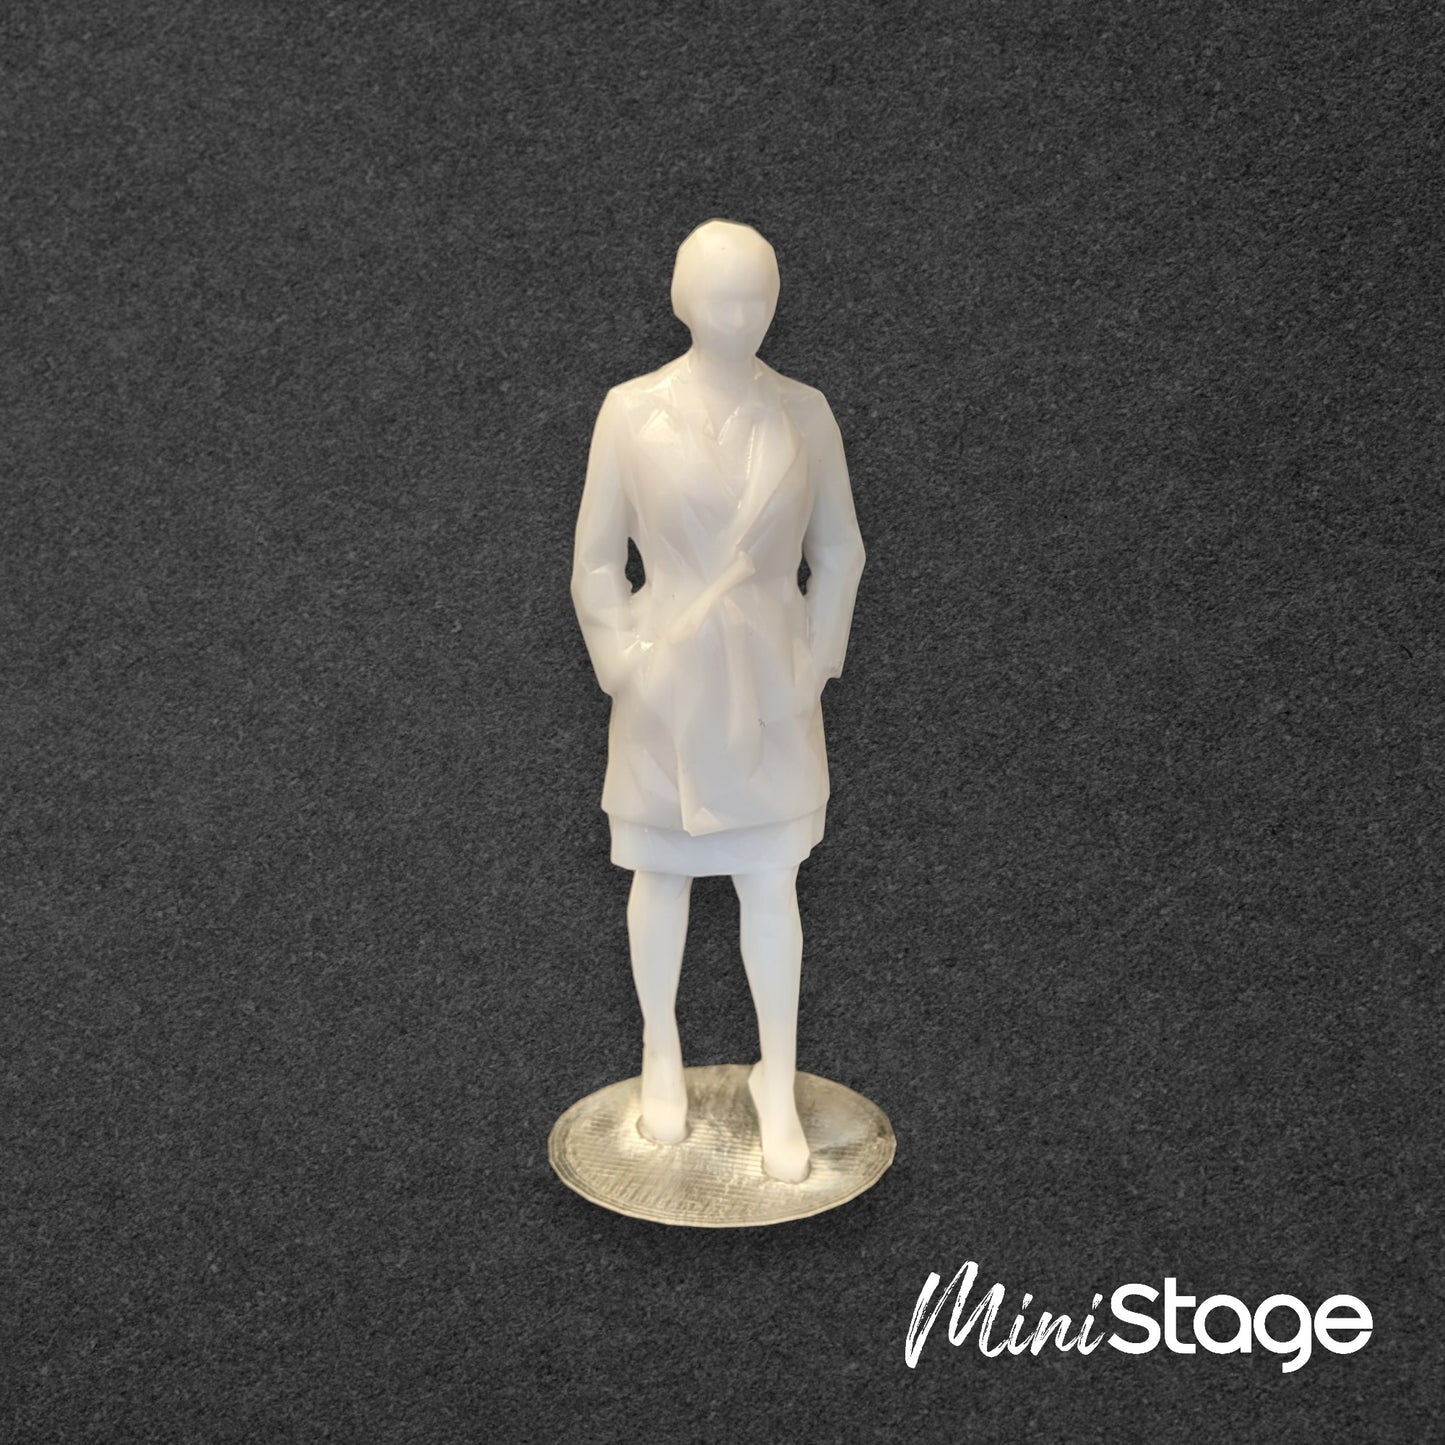 Sally - Set of Three Low Poly Scale Figures of a Woman Sitting and Standing with a Bun.